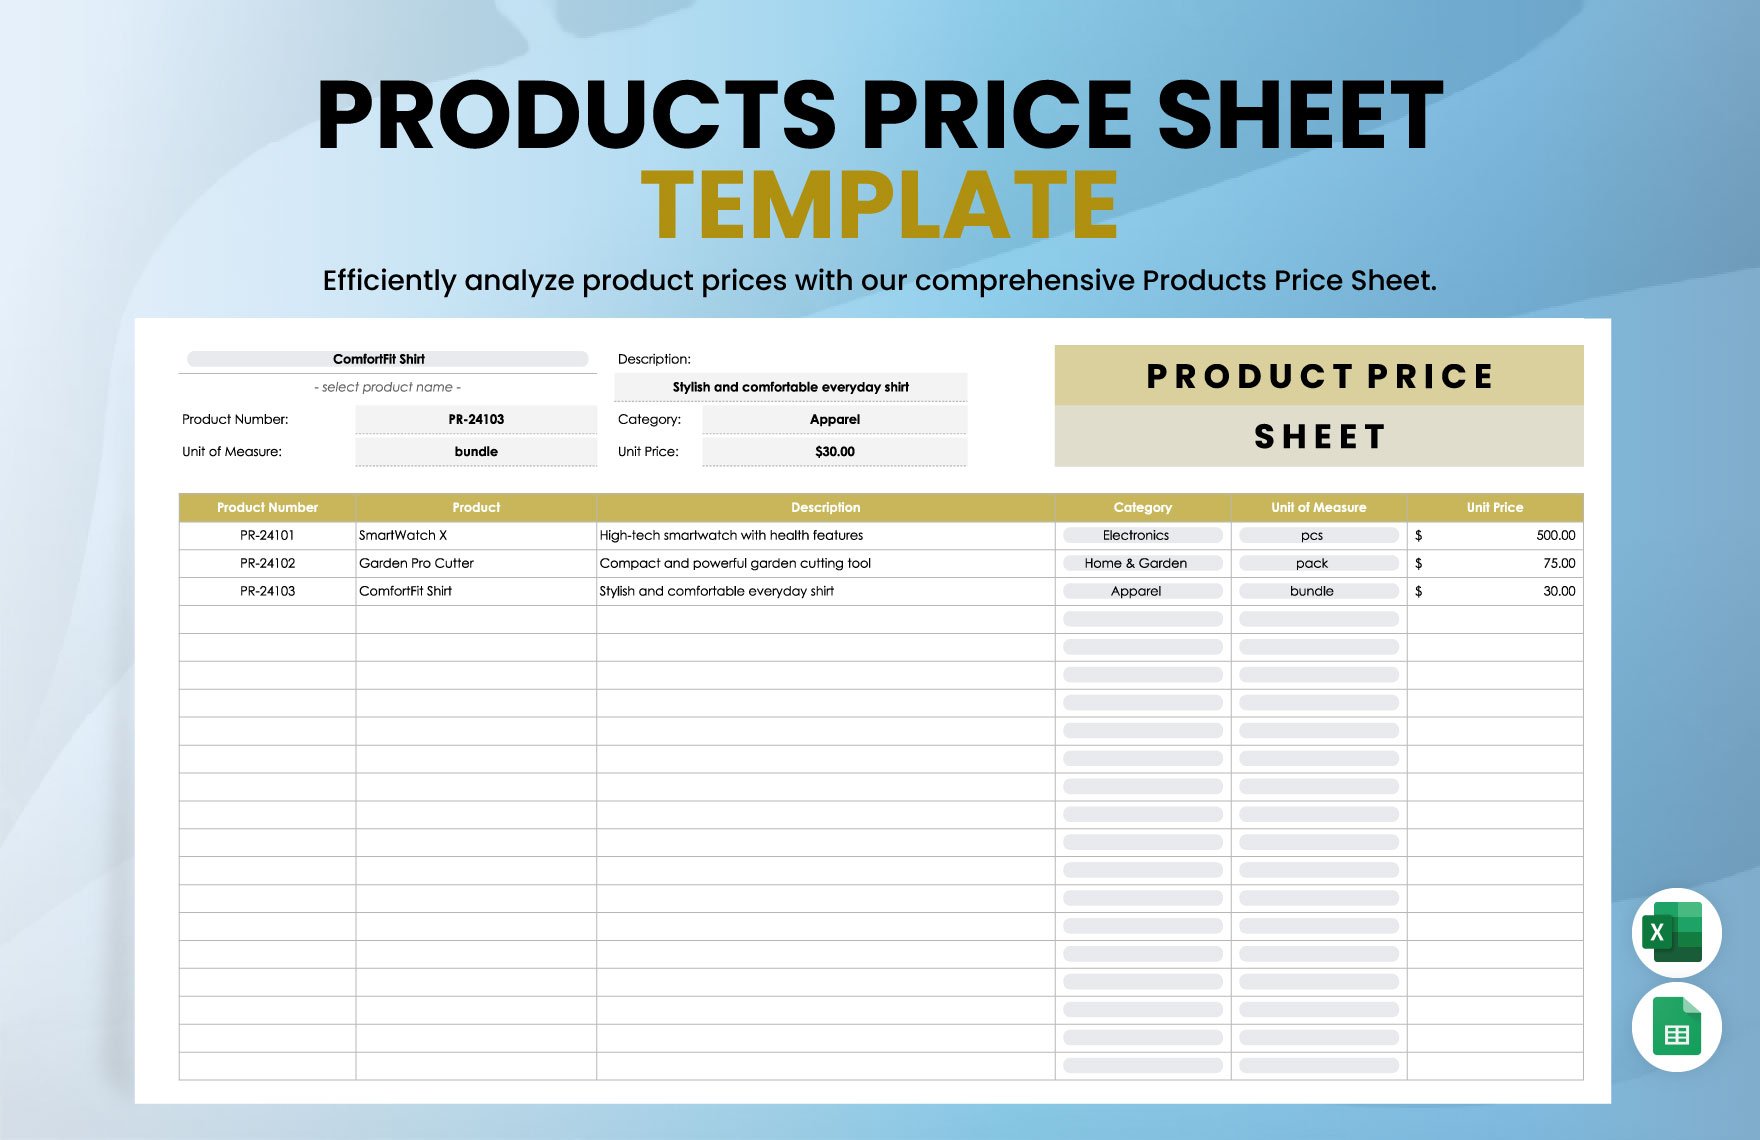 Products Price Sheet Template in Excel, Google Sheets